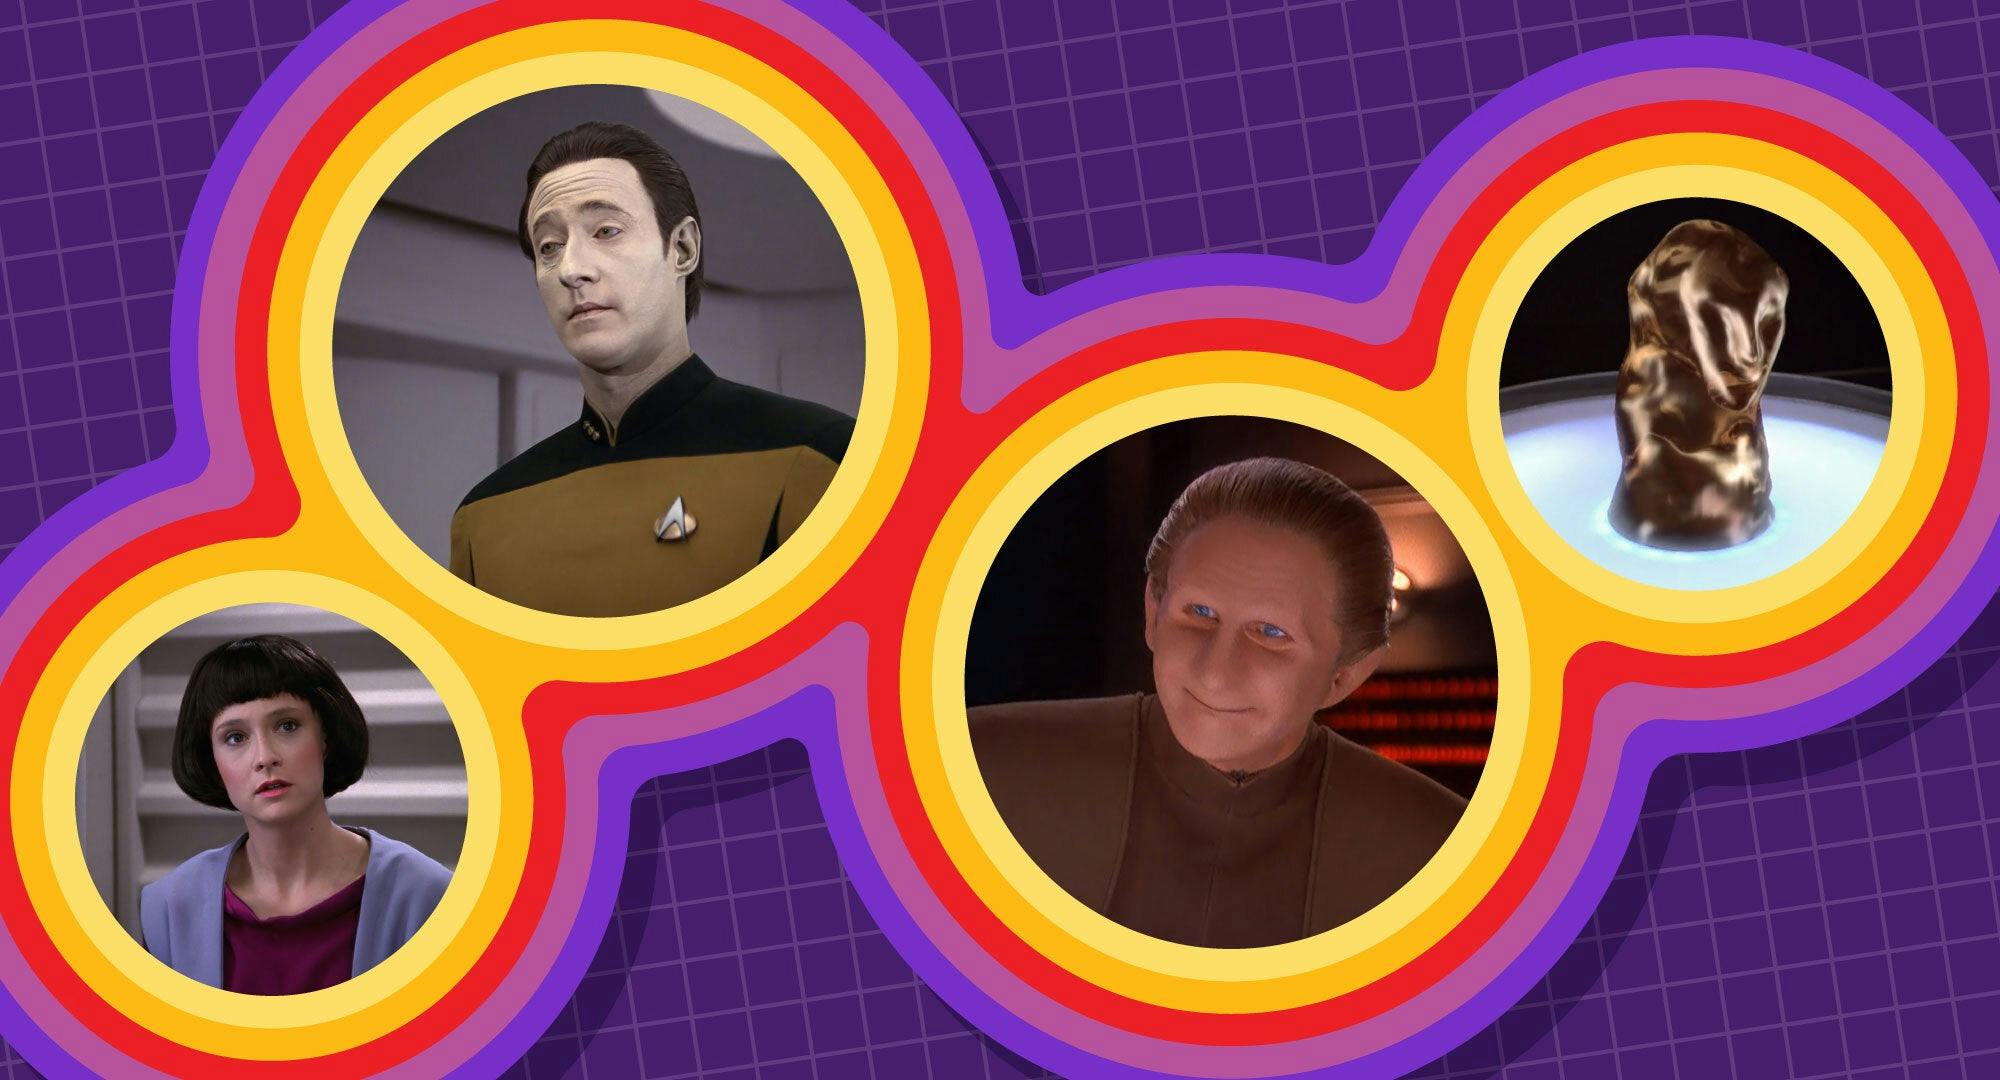 Illustrated banner featuring stills of Data, Lal, and Odo